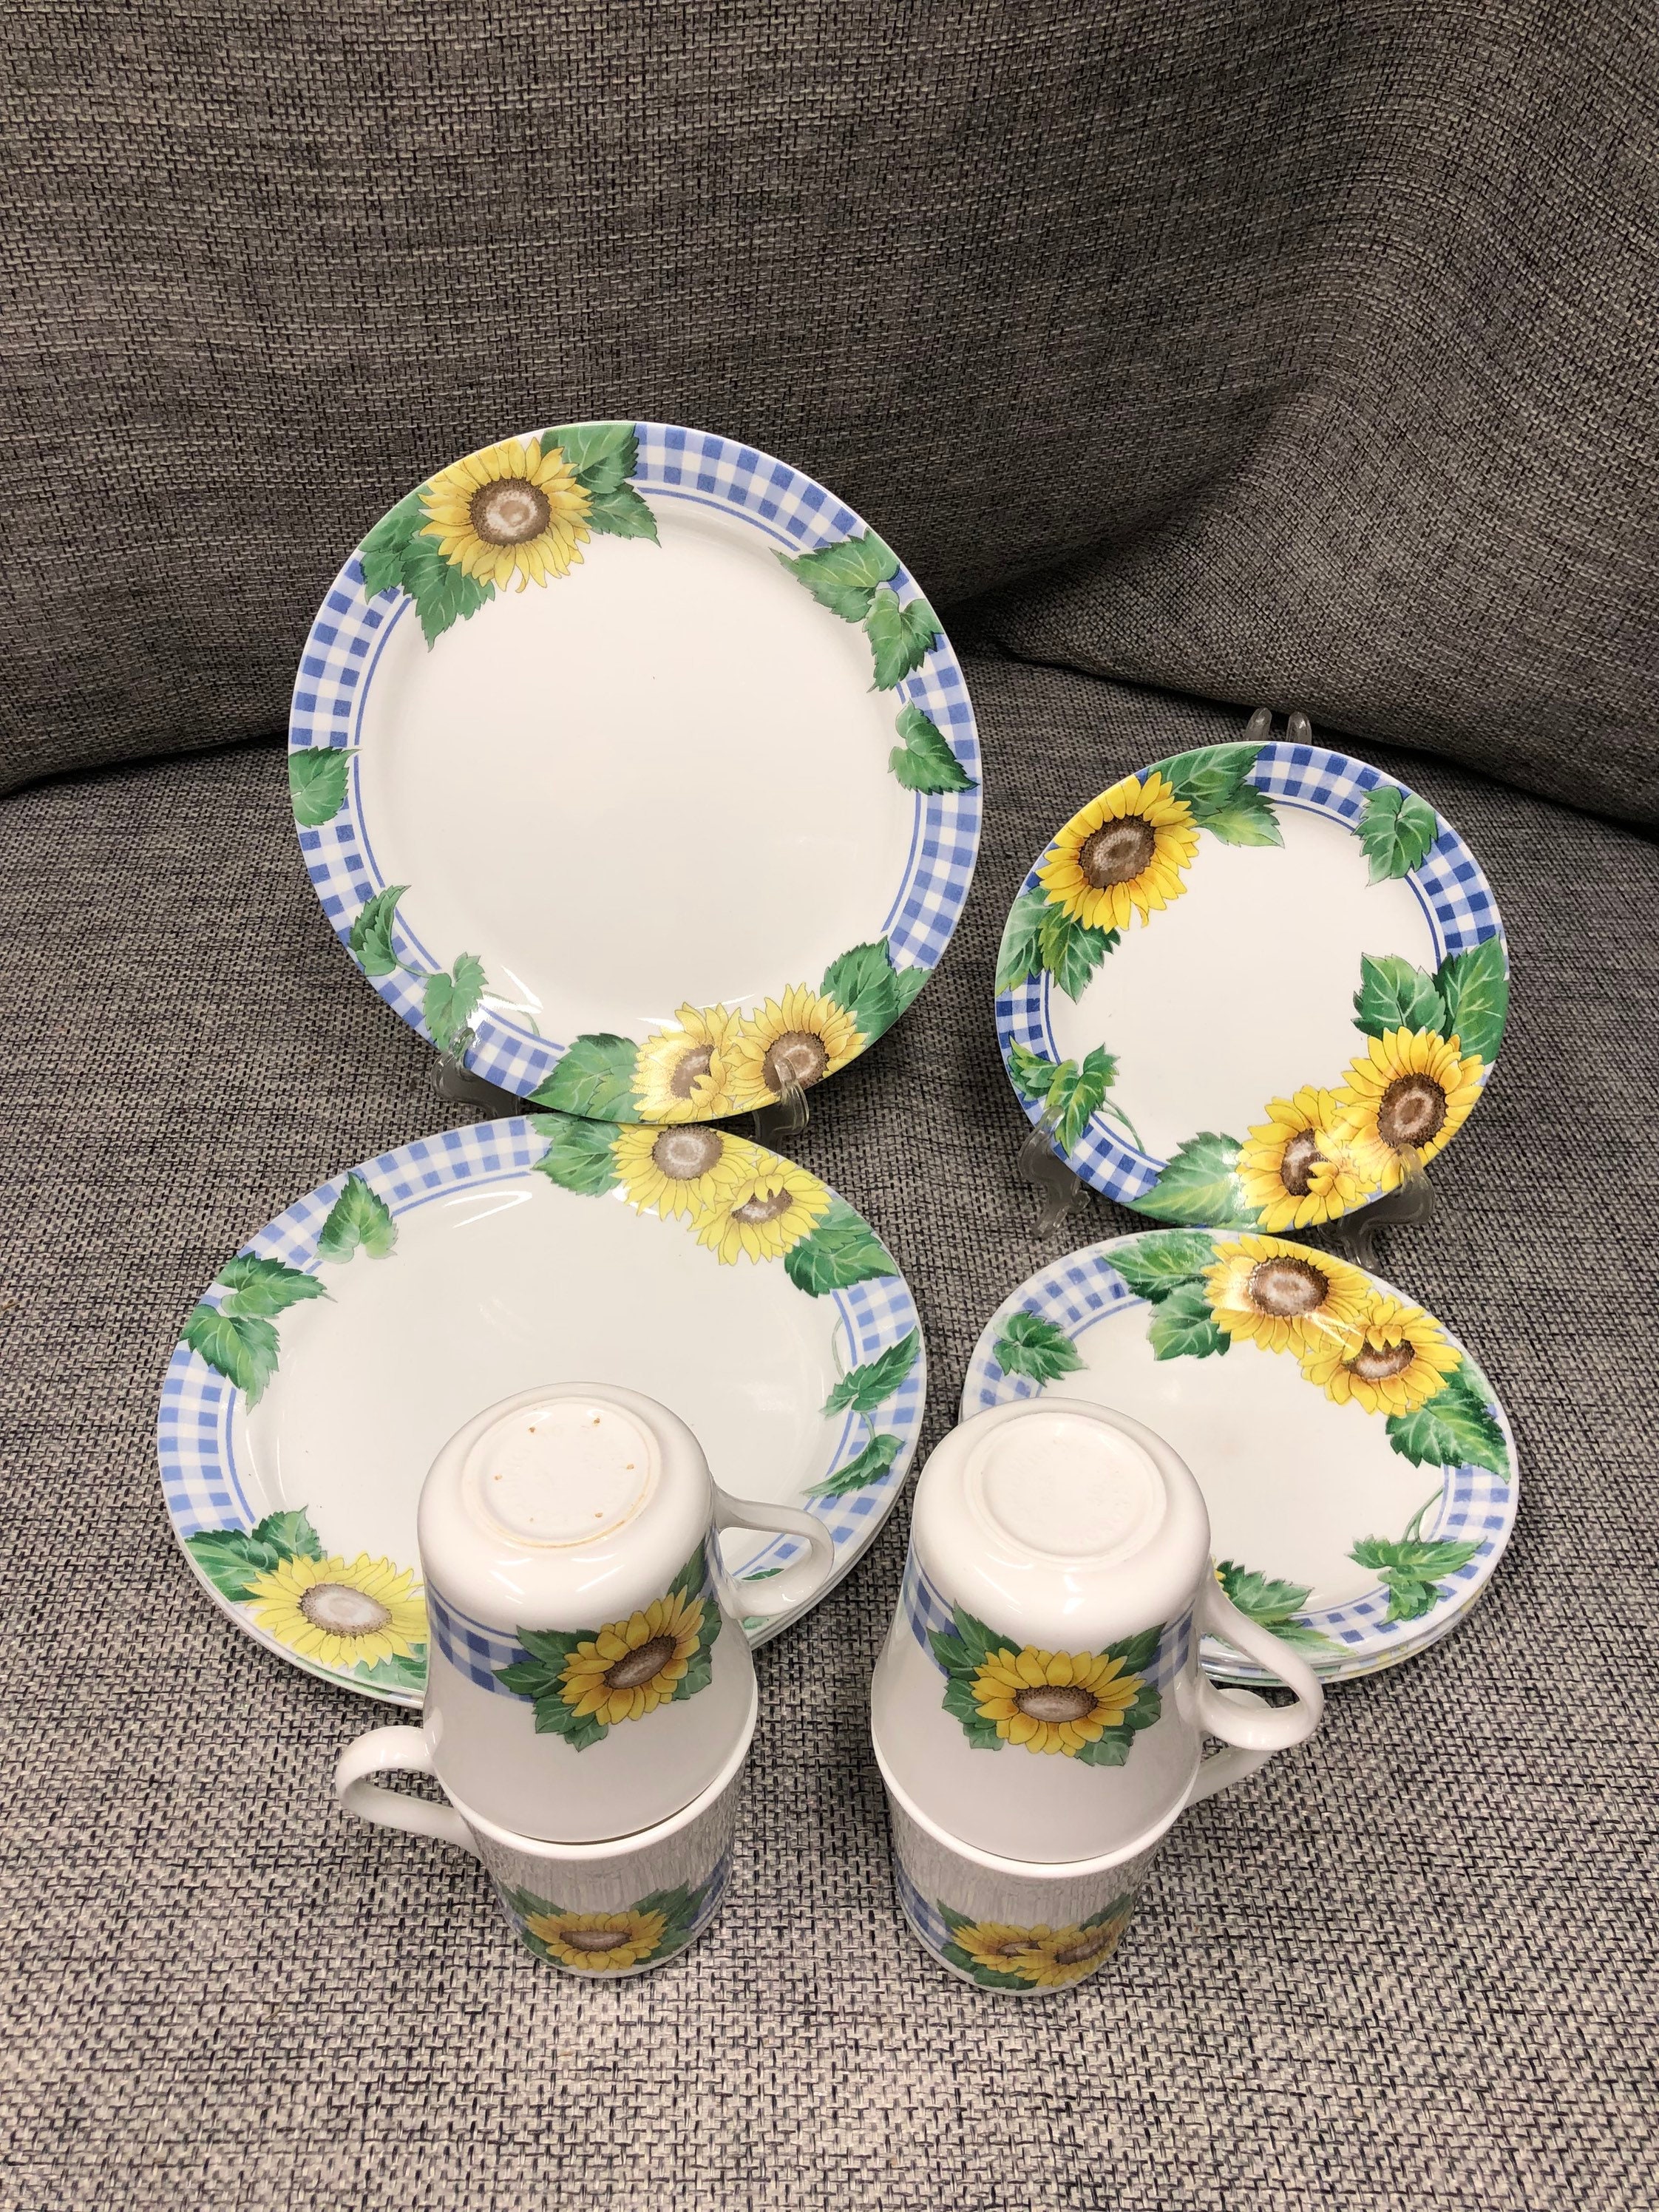 Corelle Dishes for sale in San Diego, California, Facebook Marketplace